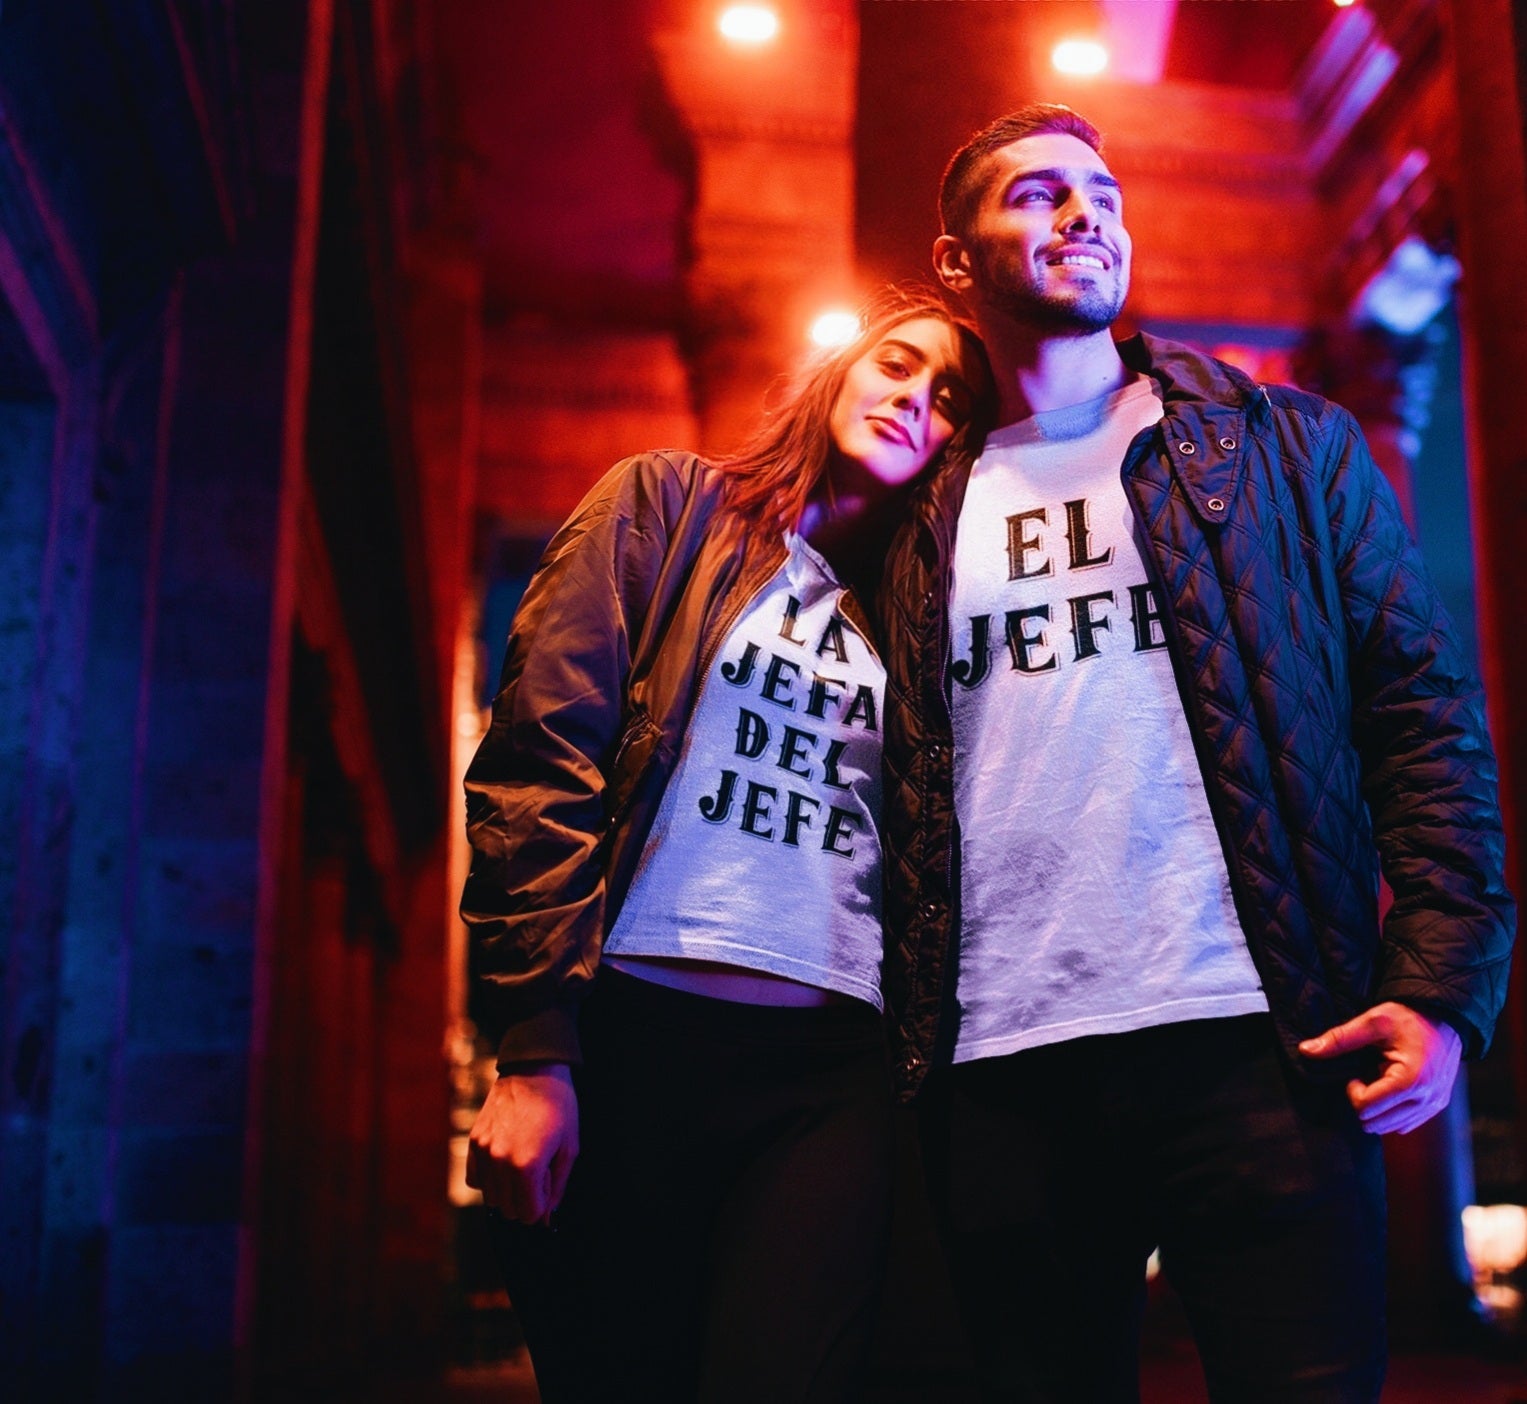 hispanic man and woman wearing funny white t-shirts. the mans's shirt says 'el jefe' and the woman's shirt says 'la jefa del jefe'